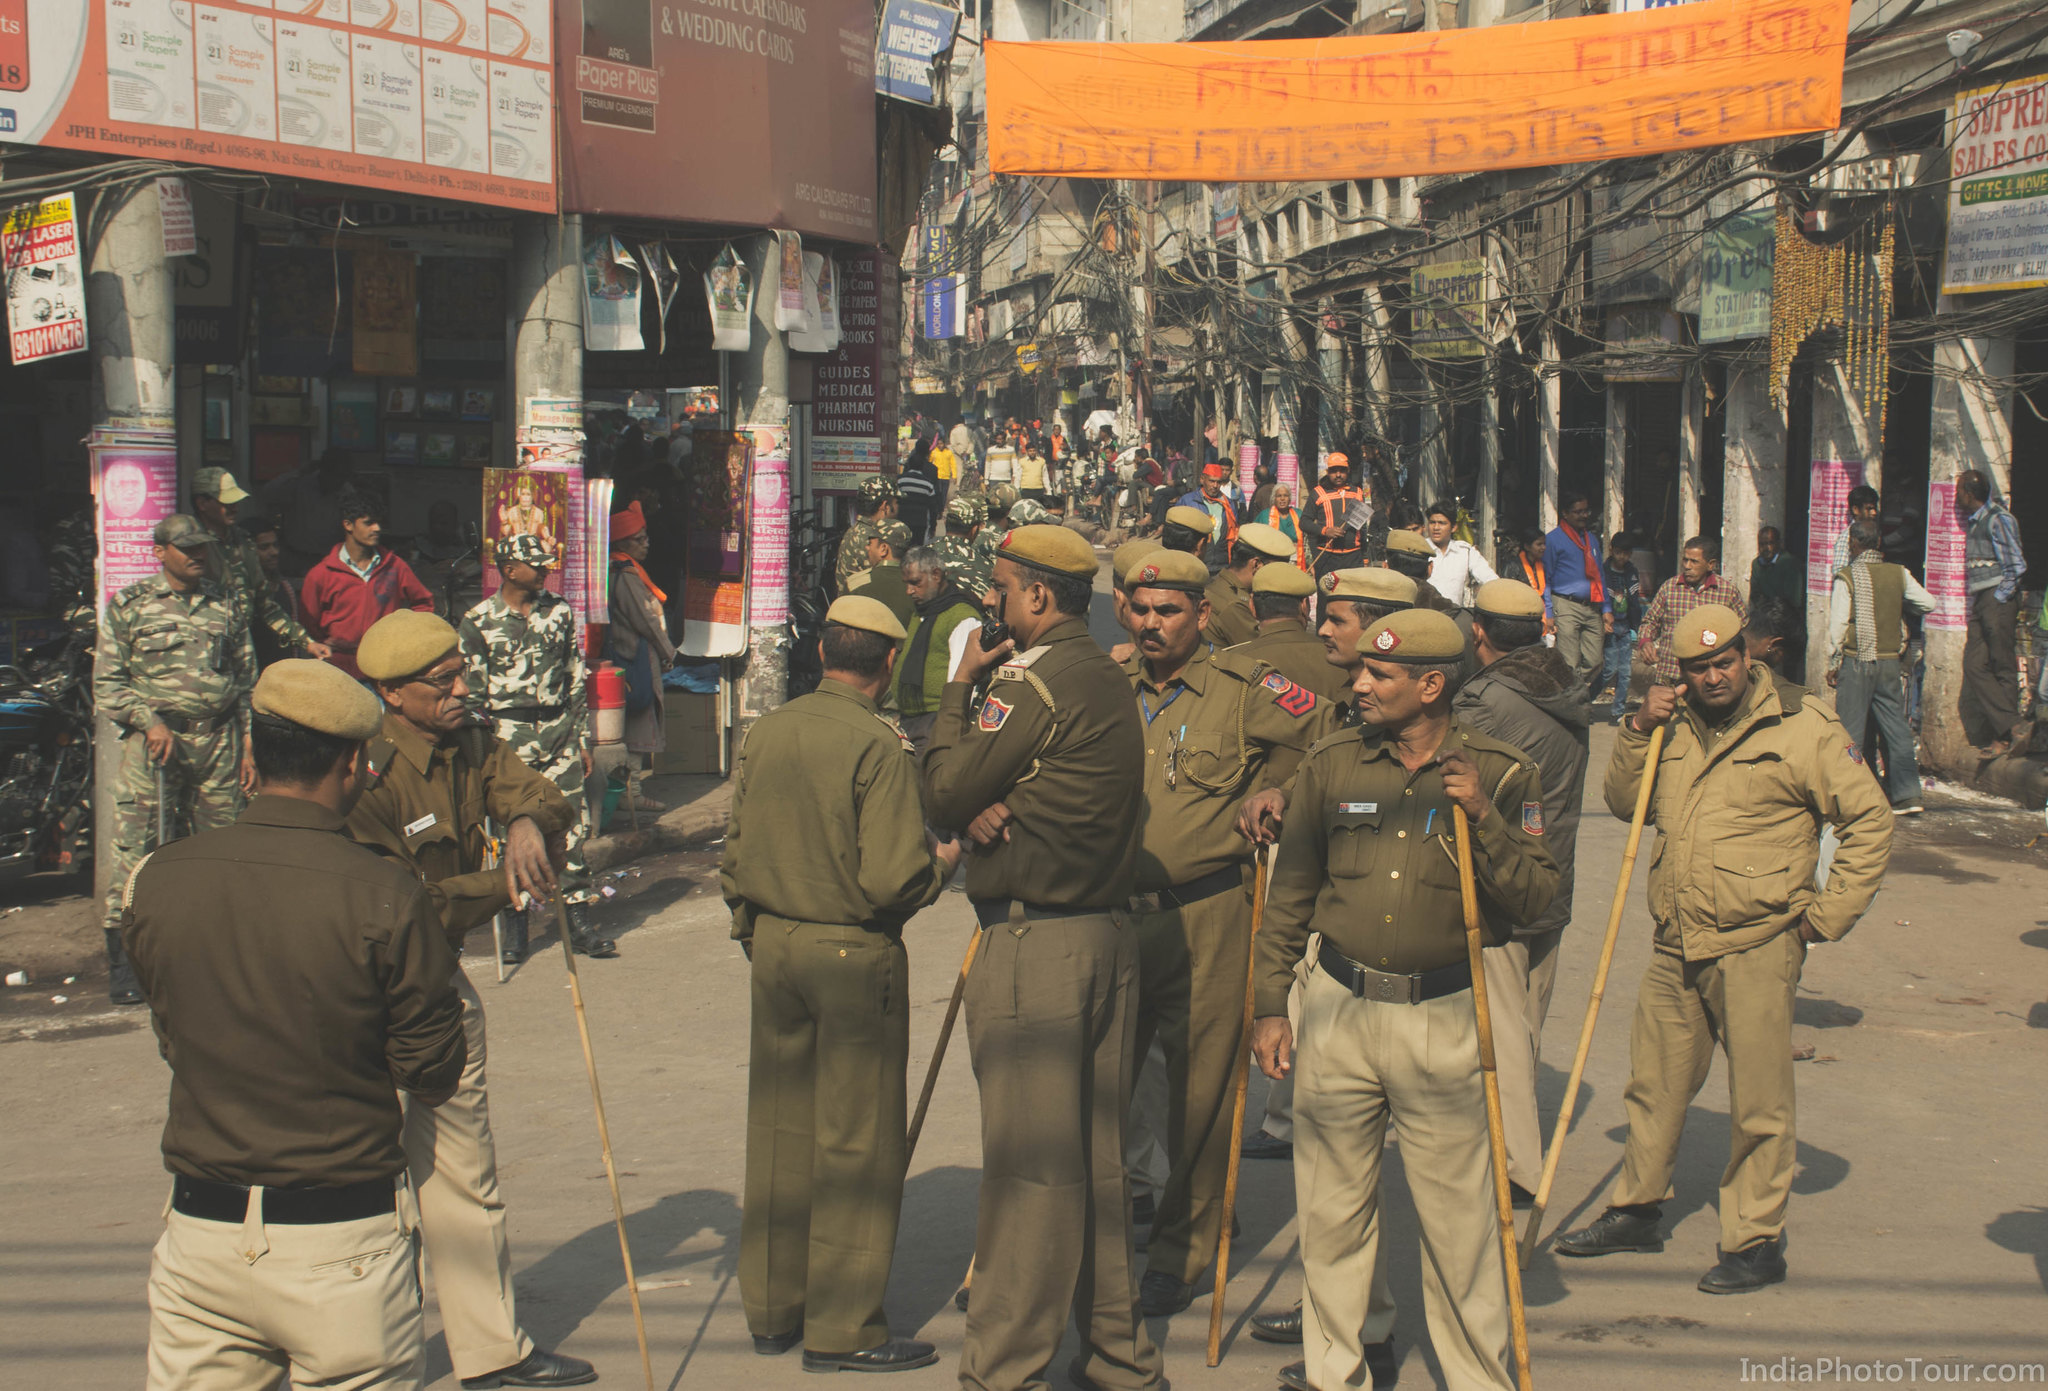 Local policemen on street managing crowd and traffic during a street procession